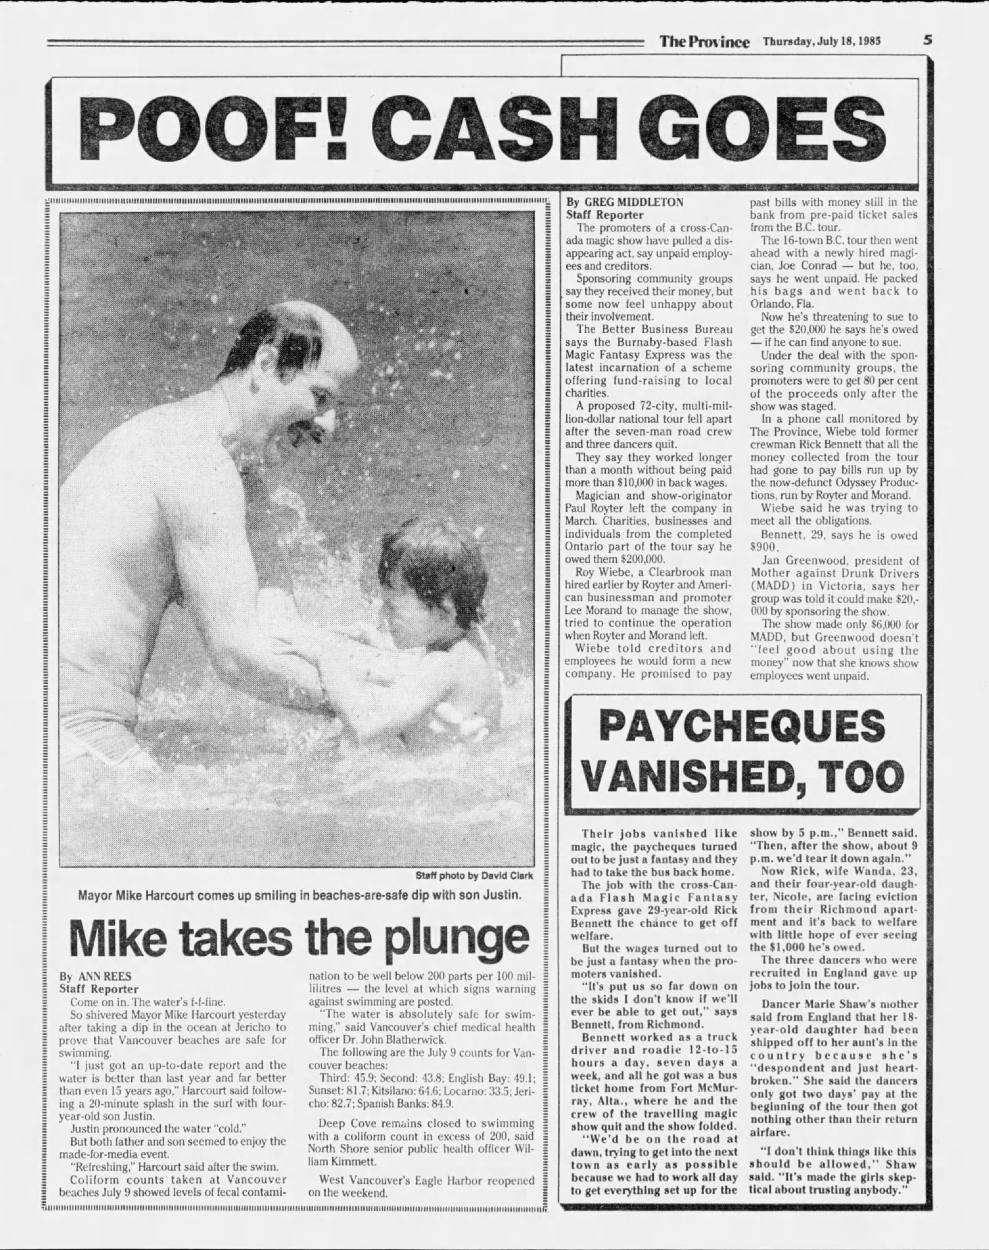  A black and white newspaper clipping showing Hike Harcourt in swimming trunks splashing in the water with his son, who looks around four to five years old.